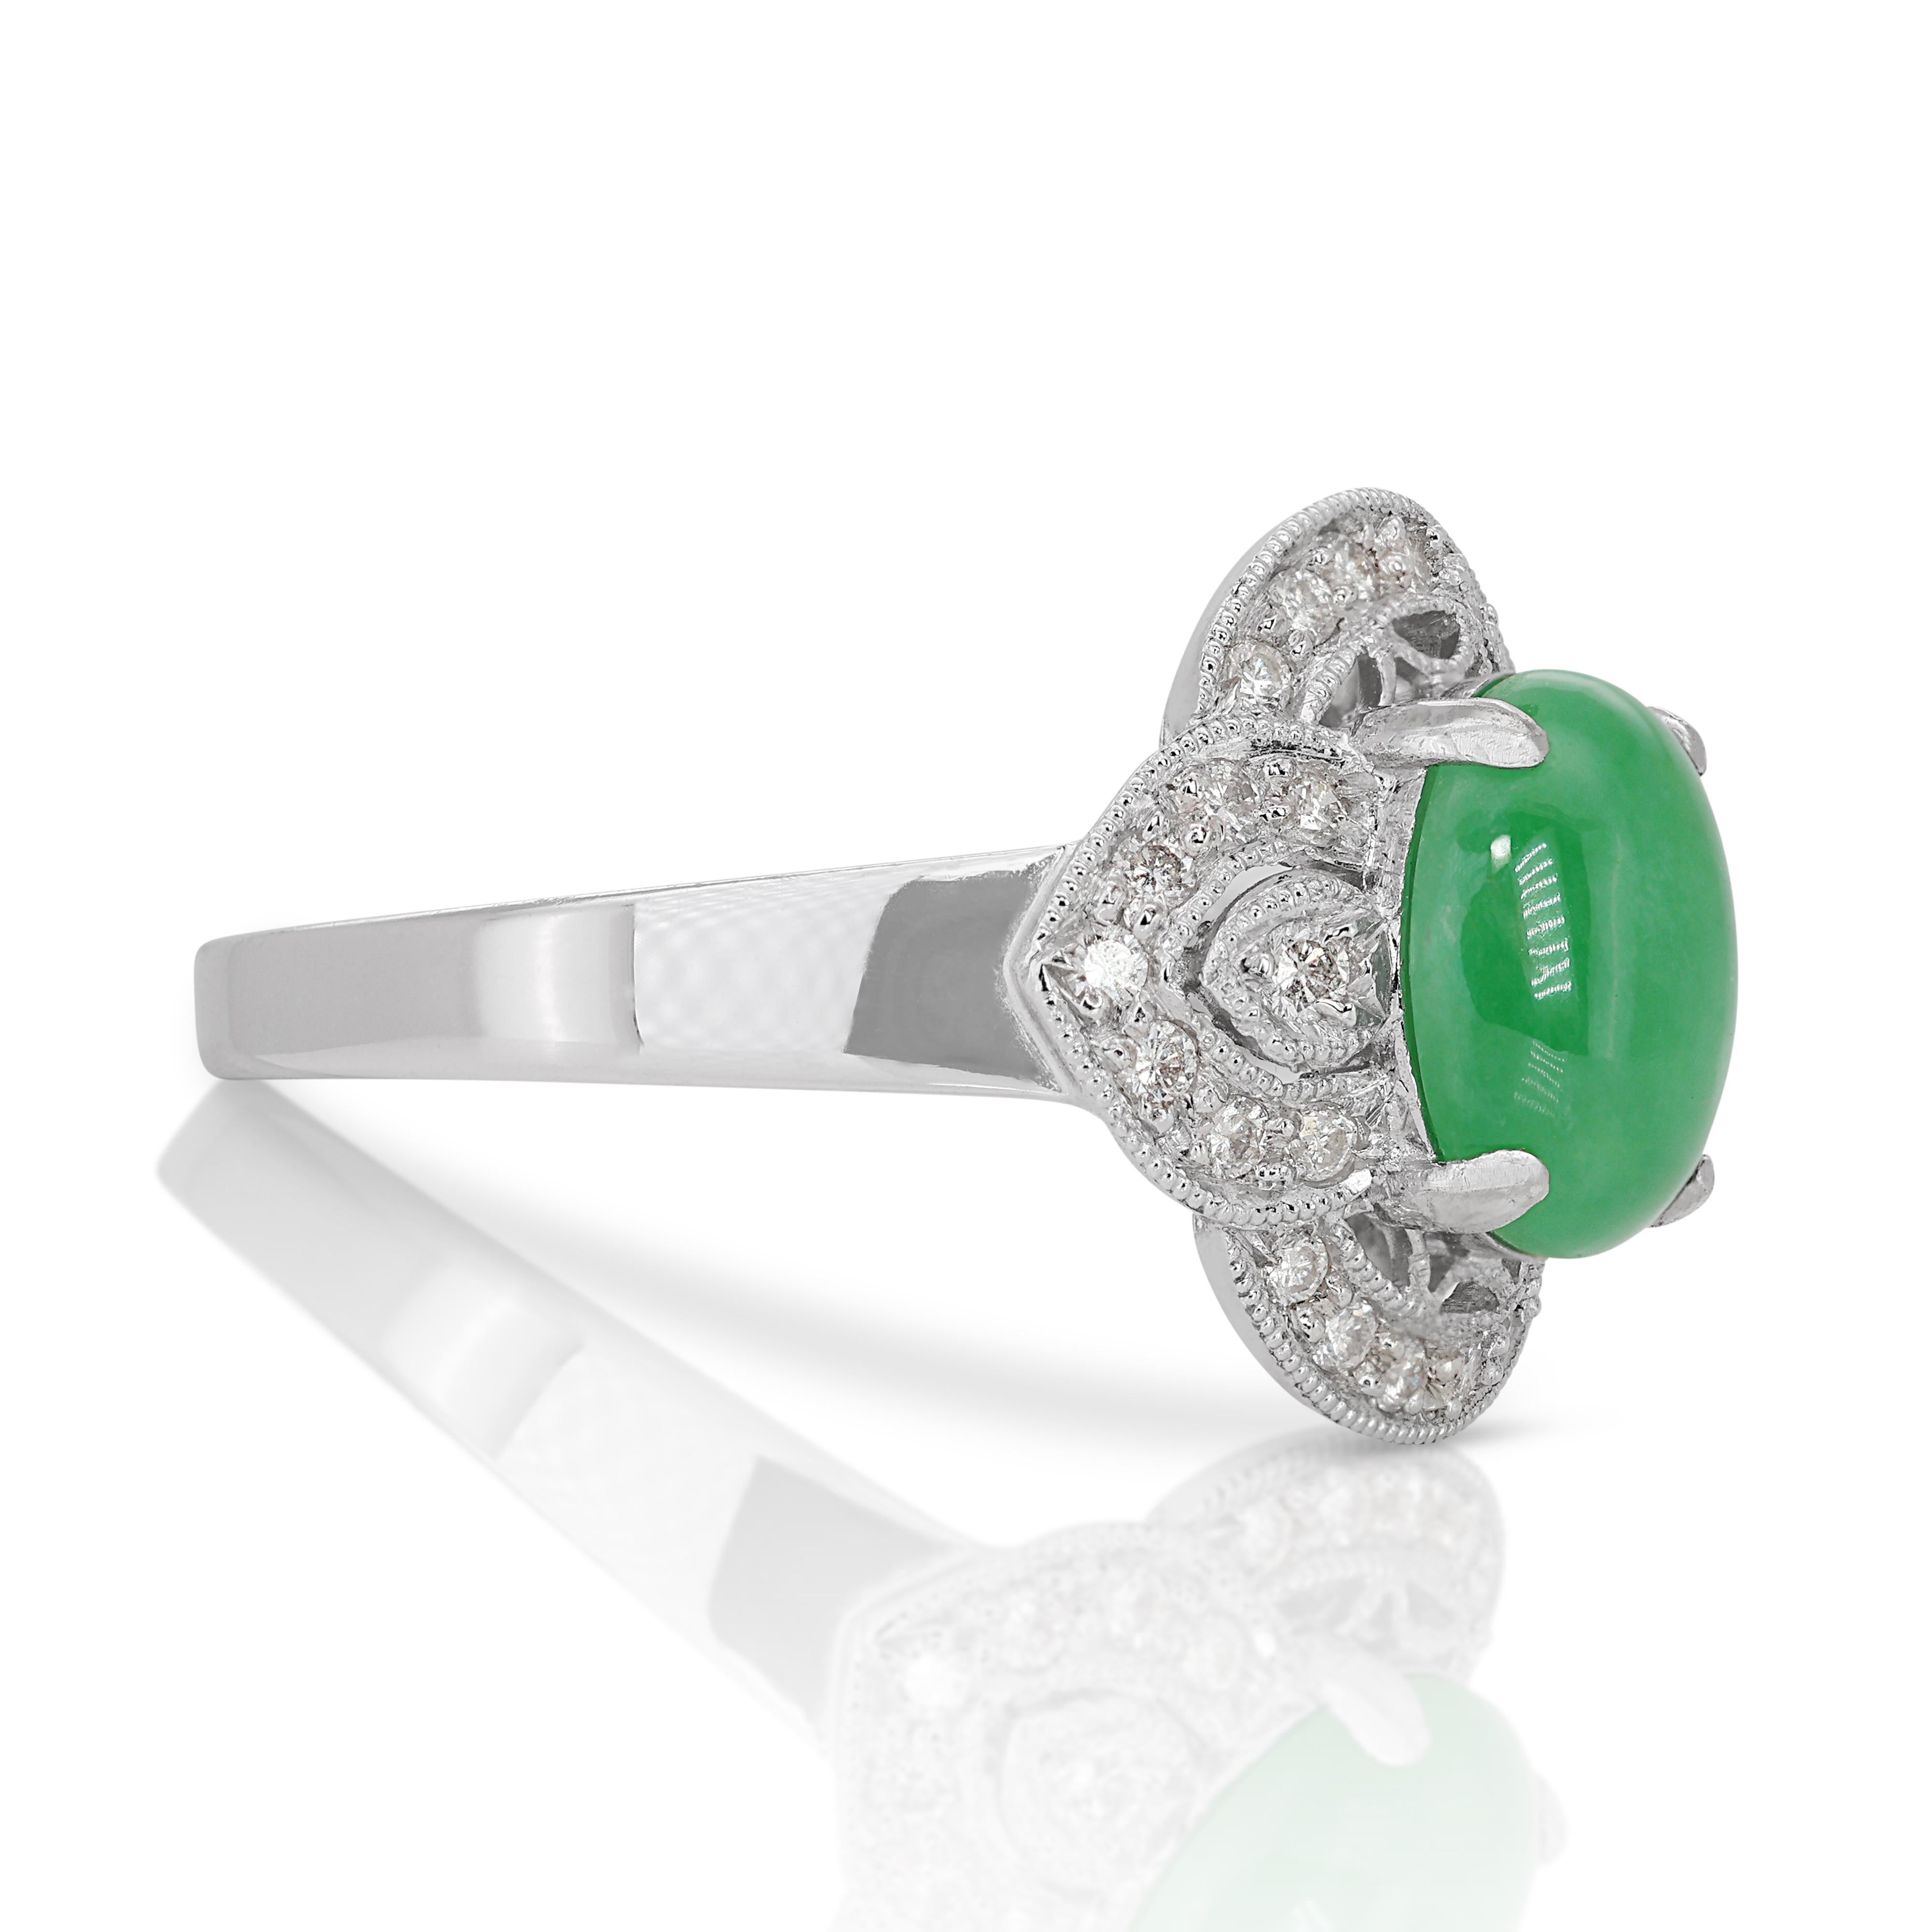 Bright Jade and Diamond Ring set in Gleaming 18K White Gold In Excellent Condition For Sale In רמת גן, IL